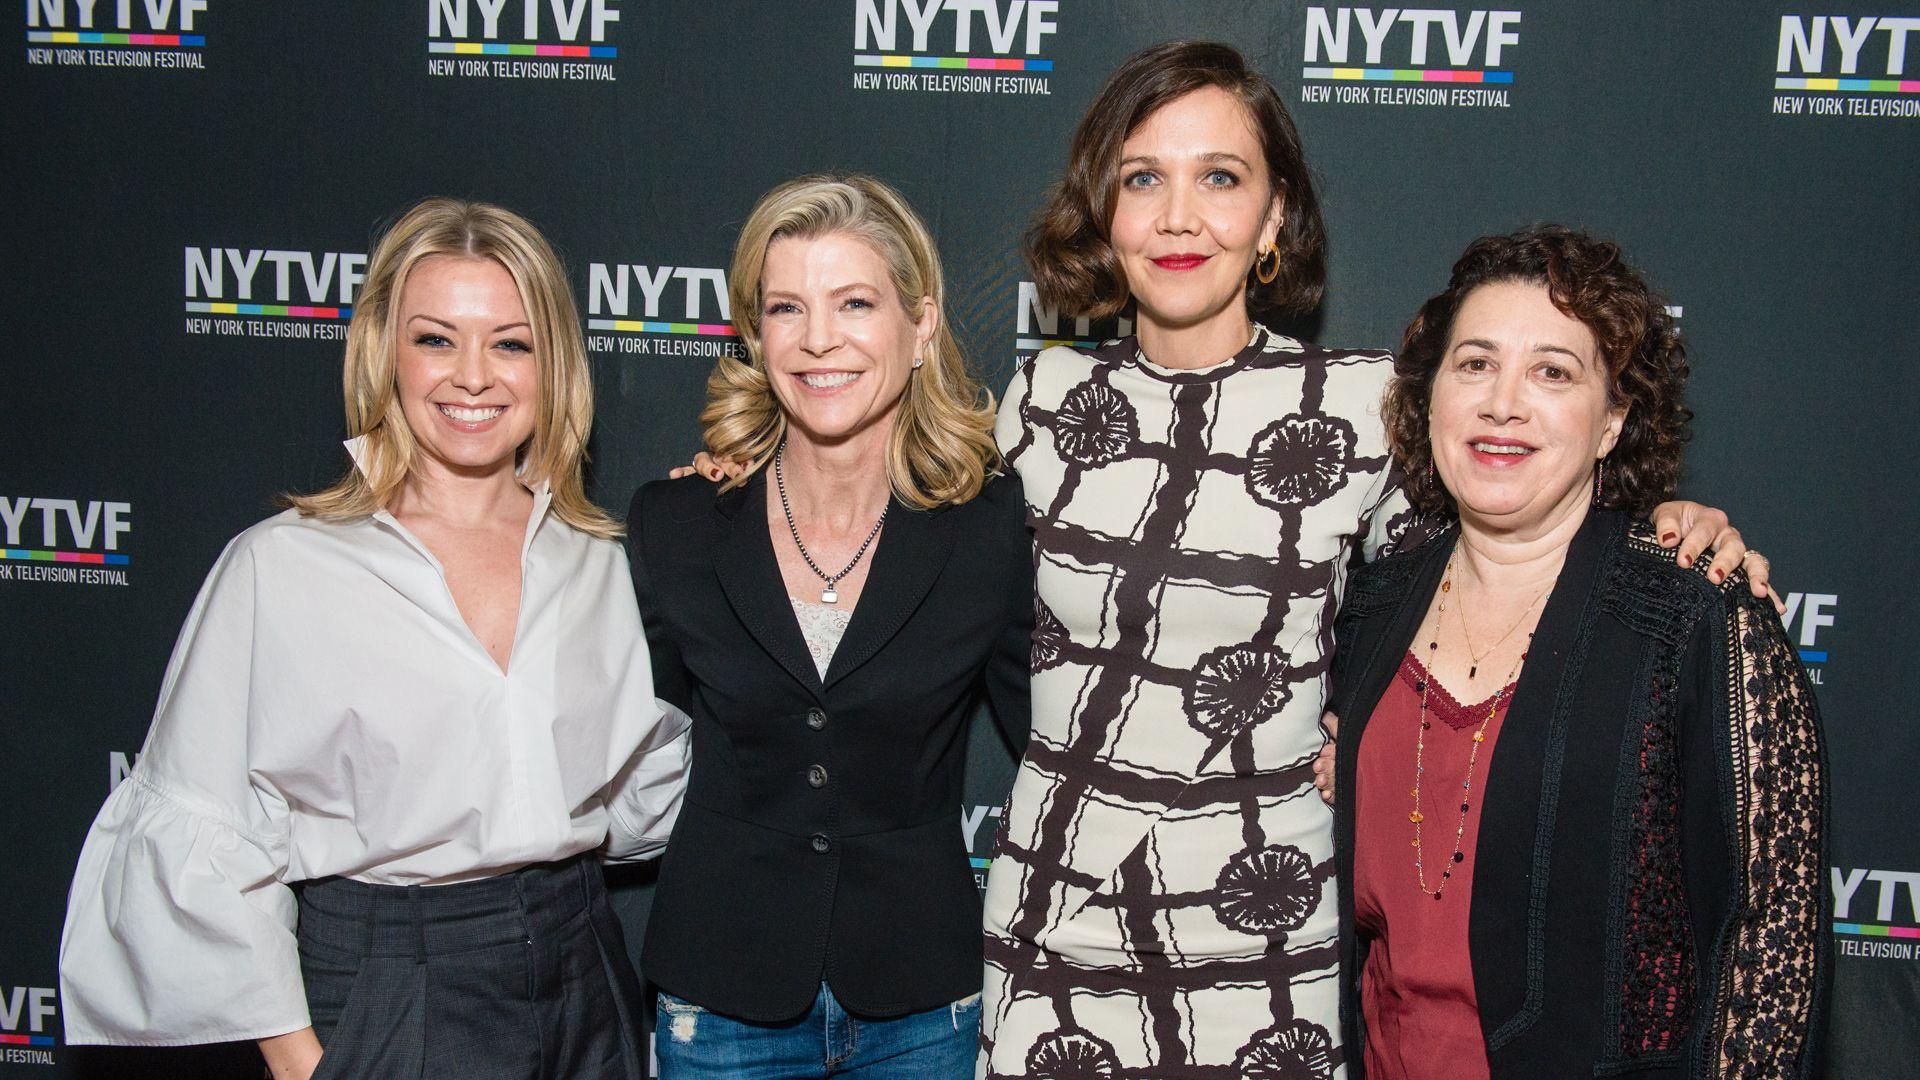 NYTVF Welcomes the Women of The Deuce